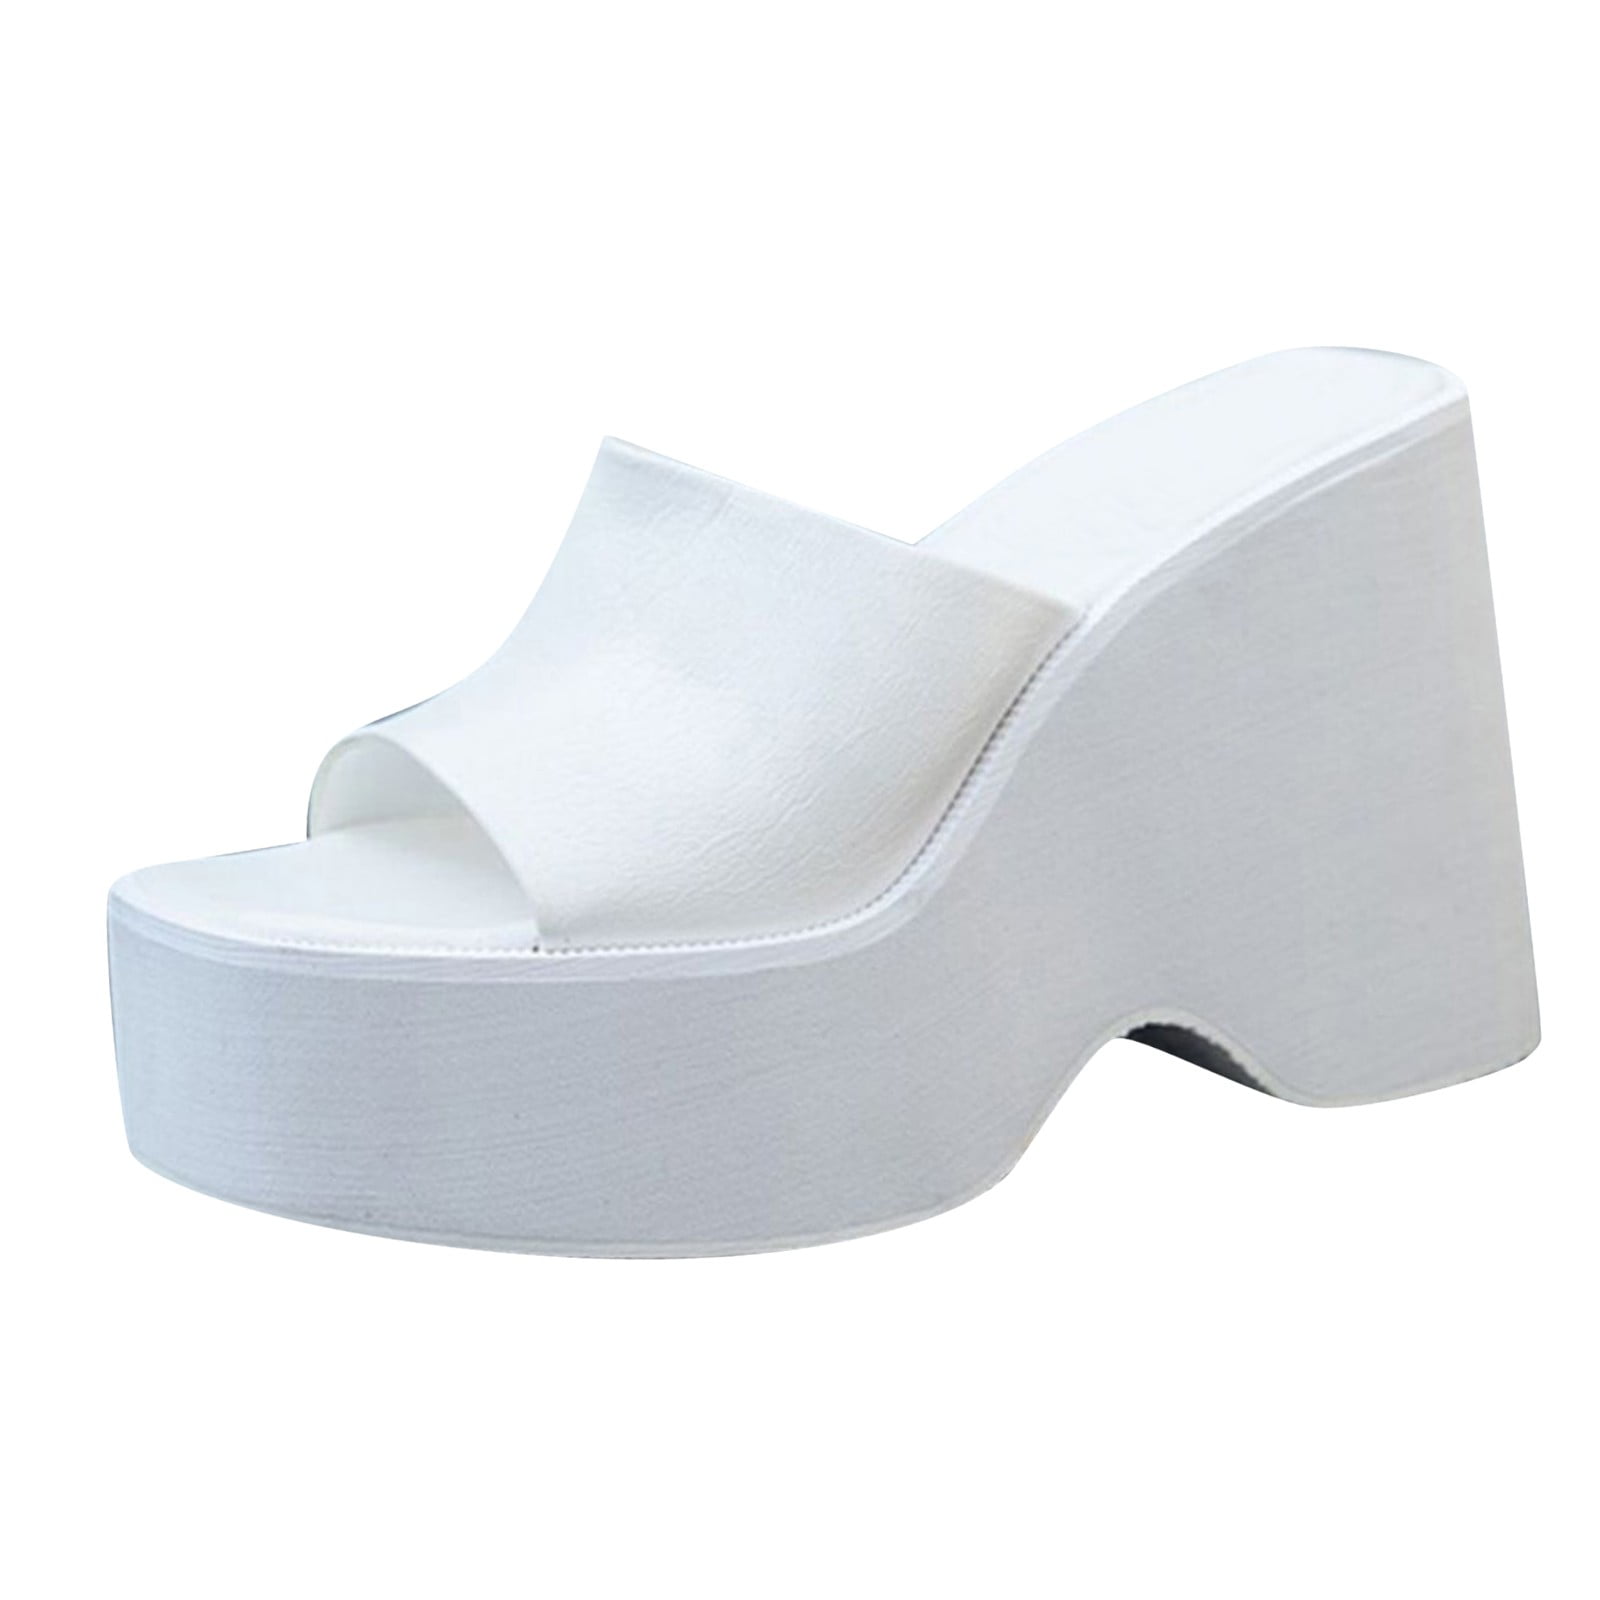 Black And White Wedge Pumps Large Size Round Toe Super High Heel Lady Women  Shoes Platform Ankle Strap Casual From Loveme3878, $33.17 | DHgate.Com